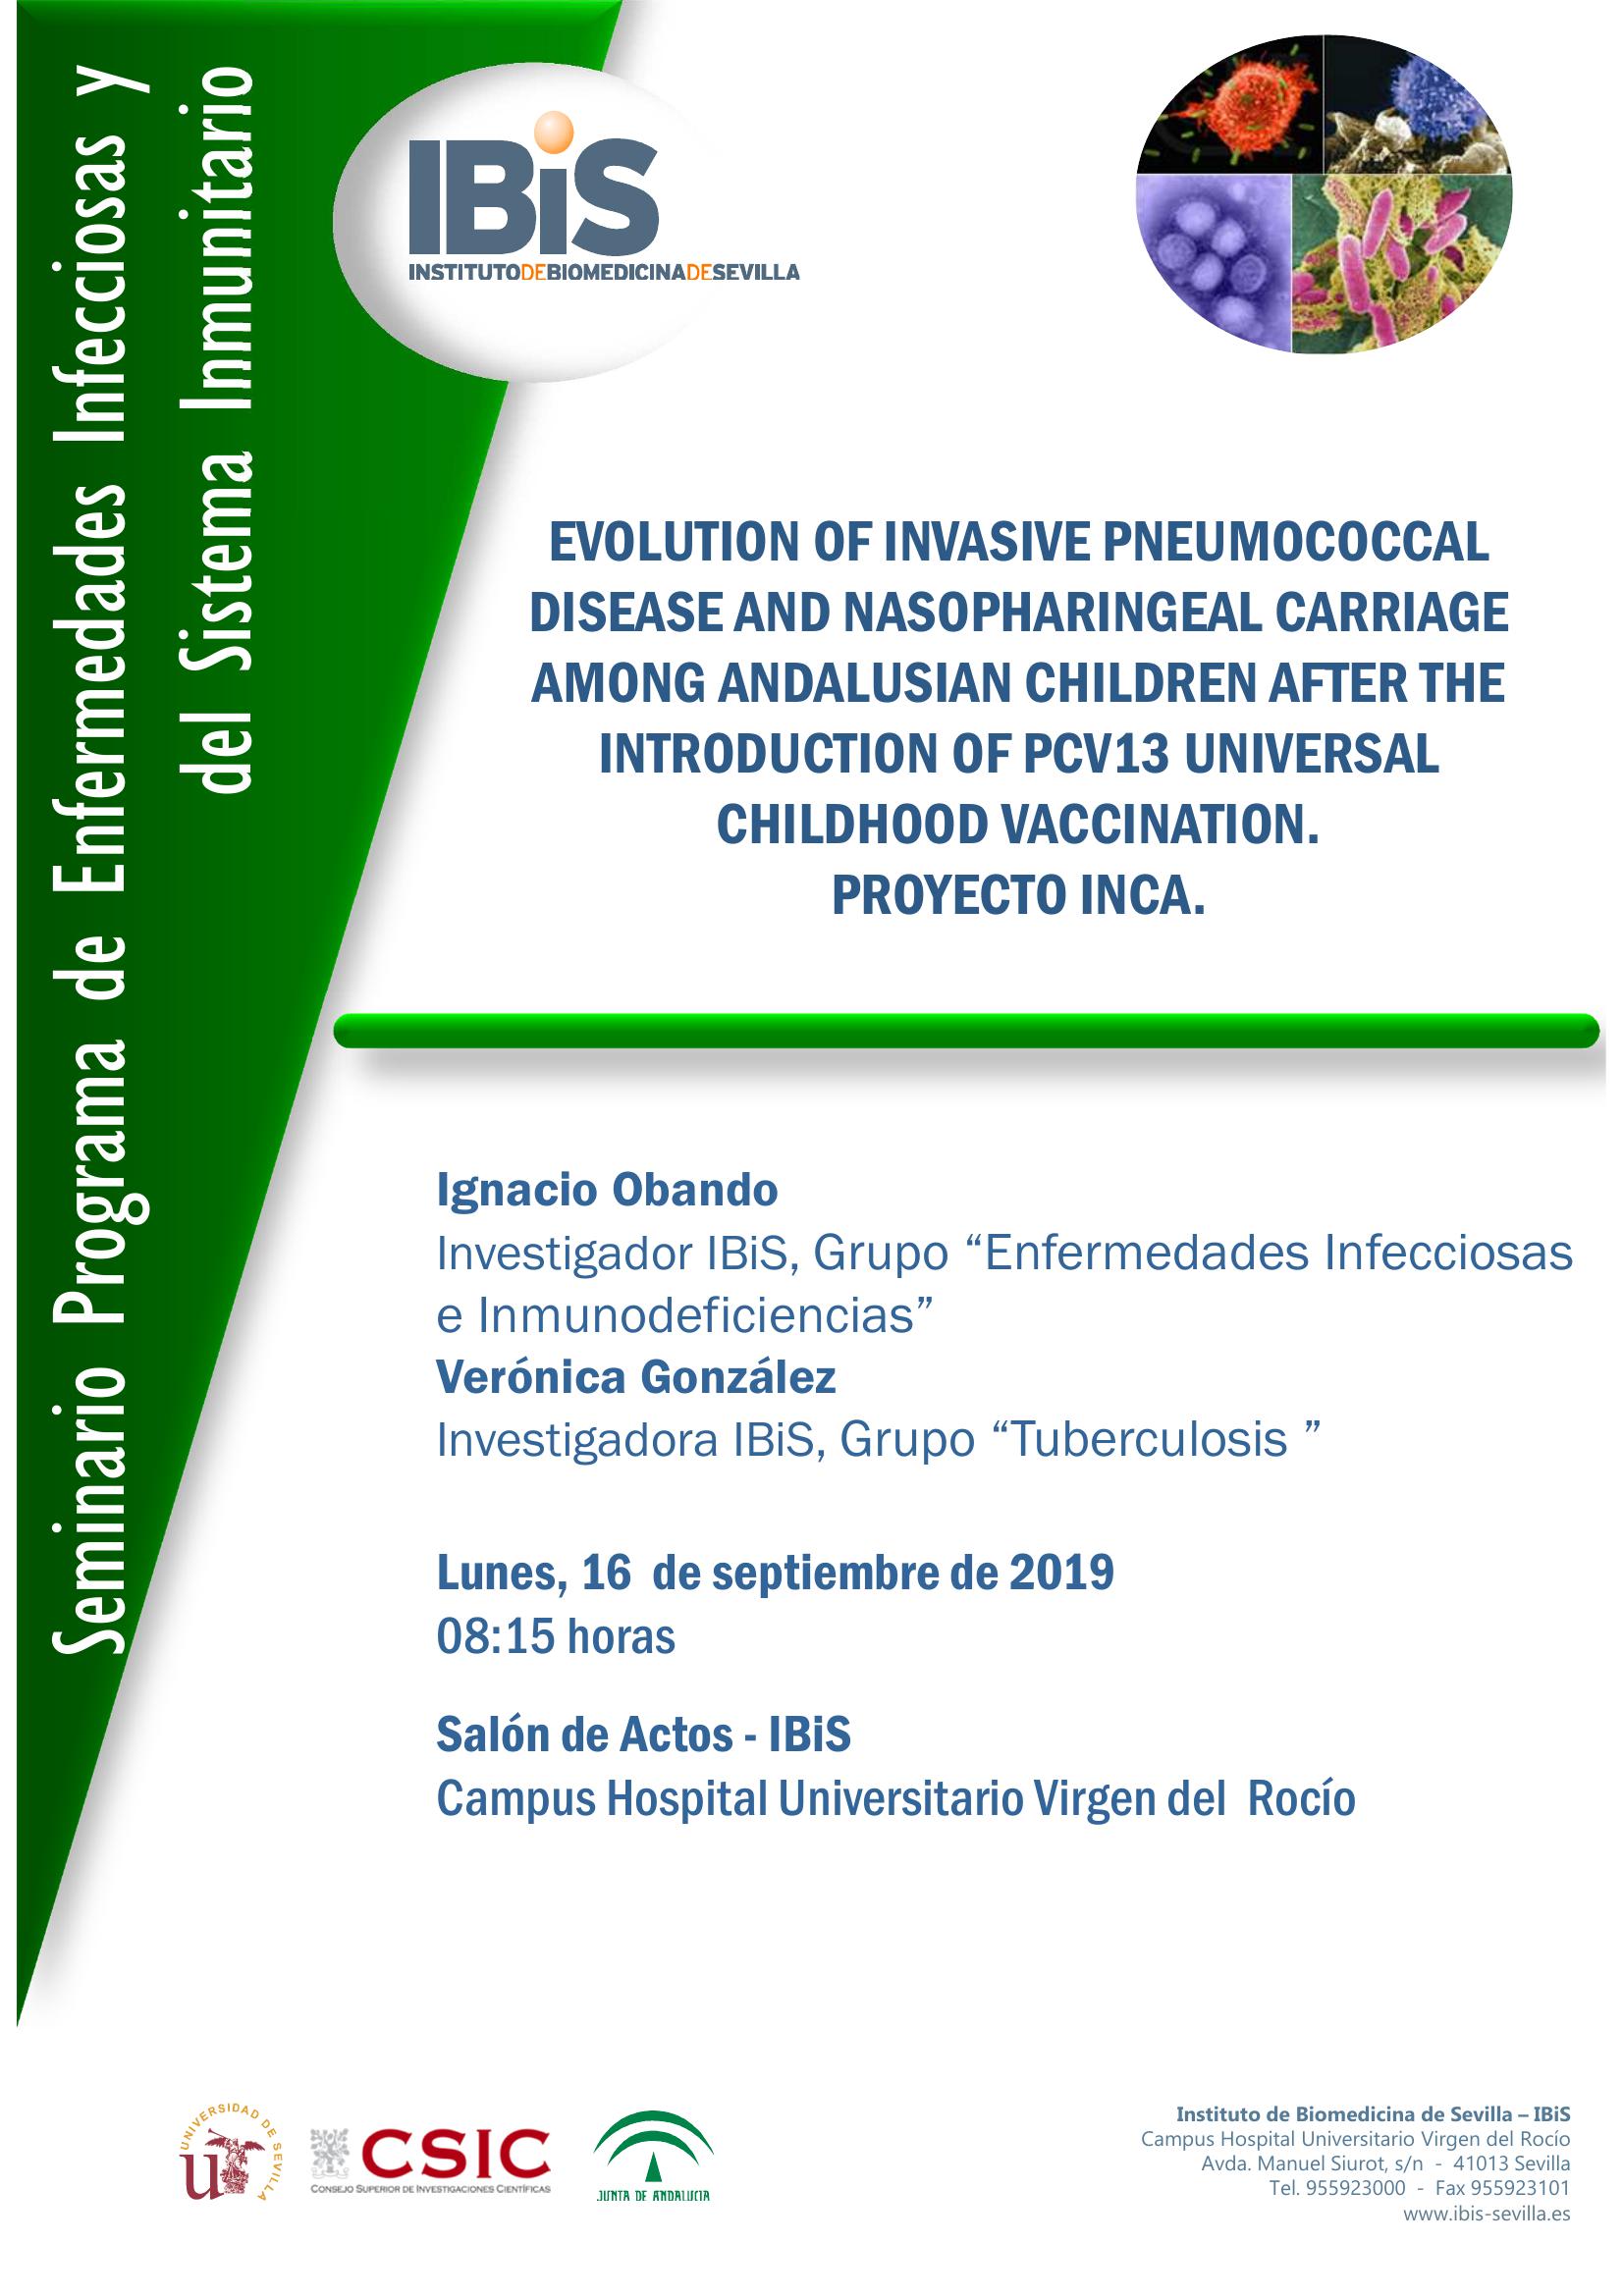 Poster: EVOLUTION OF INVASIVE PNEUMOCOCCAL DISEASE AND NASOPHARINGEAL CARRIAGE AMONG ANDALUSIAN CHILDREN AFTER THE INTRODUCTION OF PCV13 UNIVERSAL CHILDHOOD VACCINATION.  PROYECTO INCA.